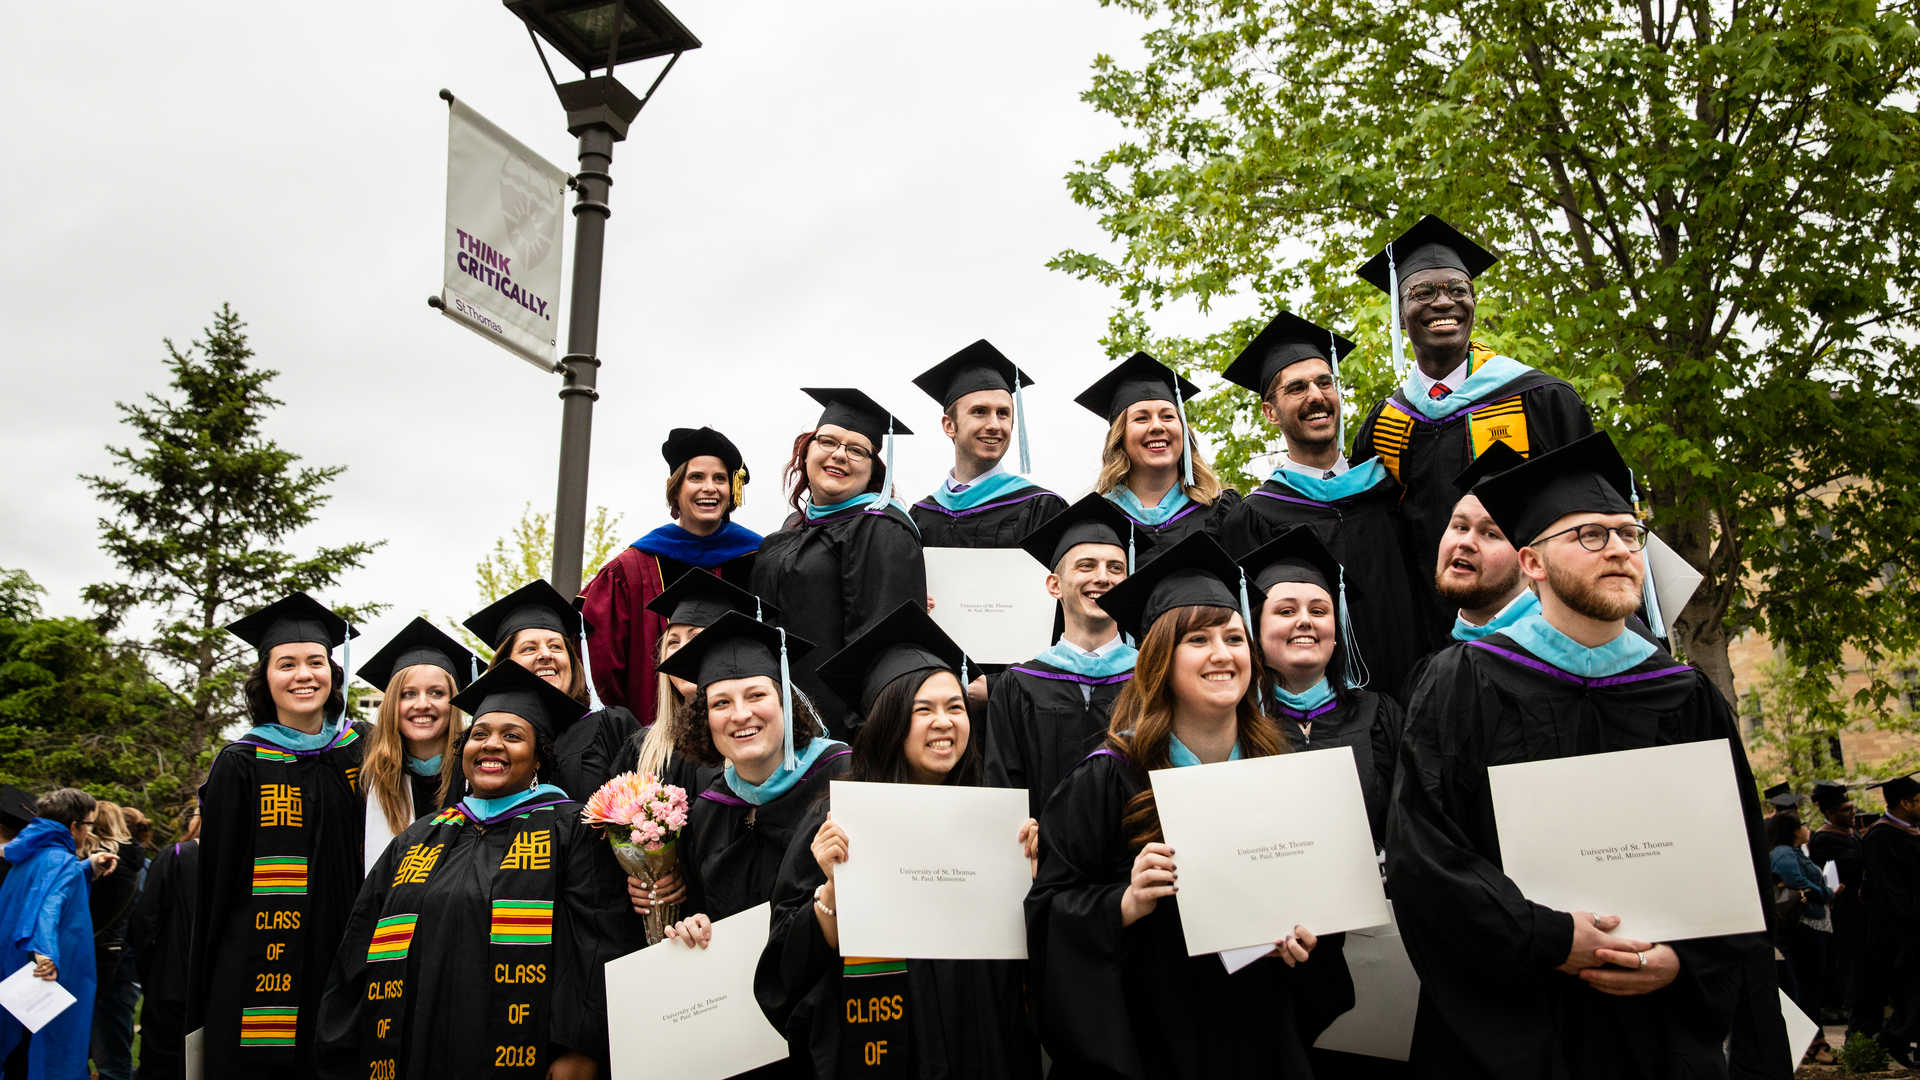 CELC graduates in group photo with diplomas 